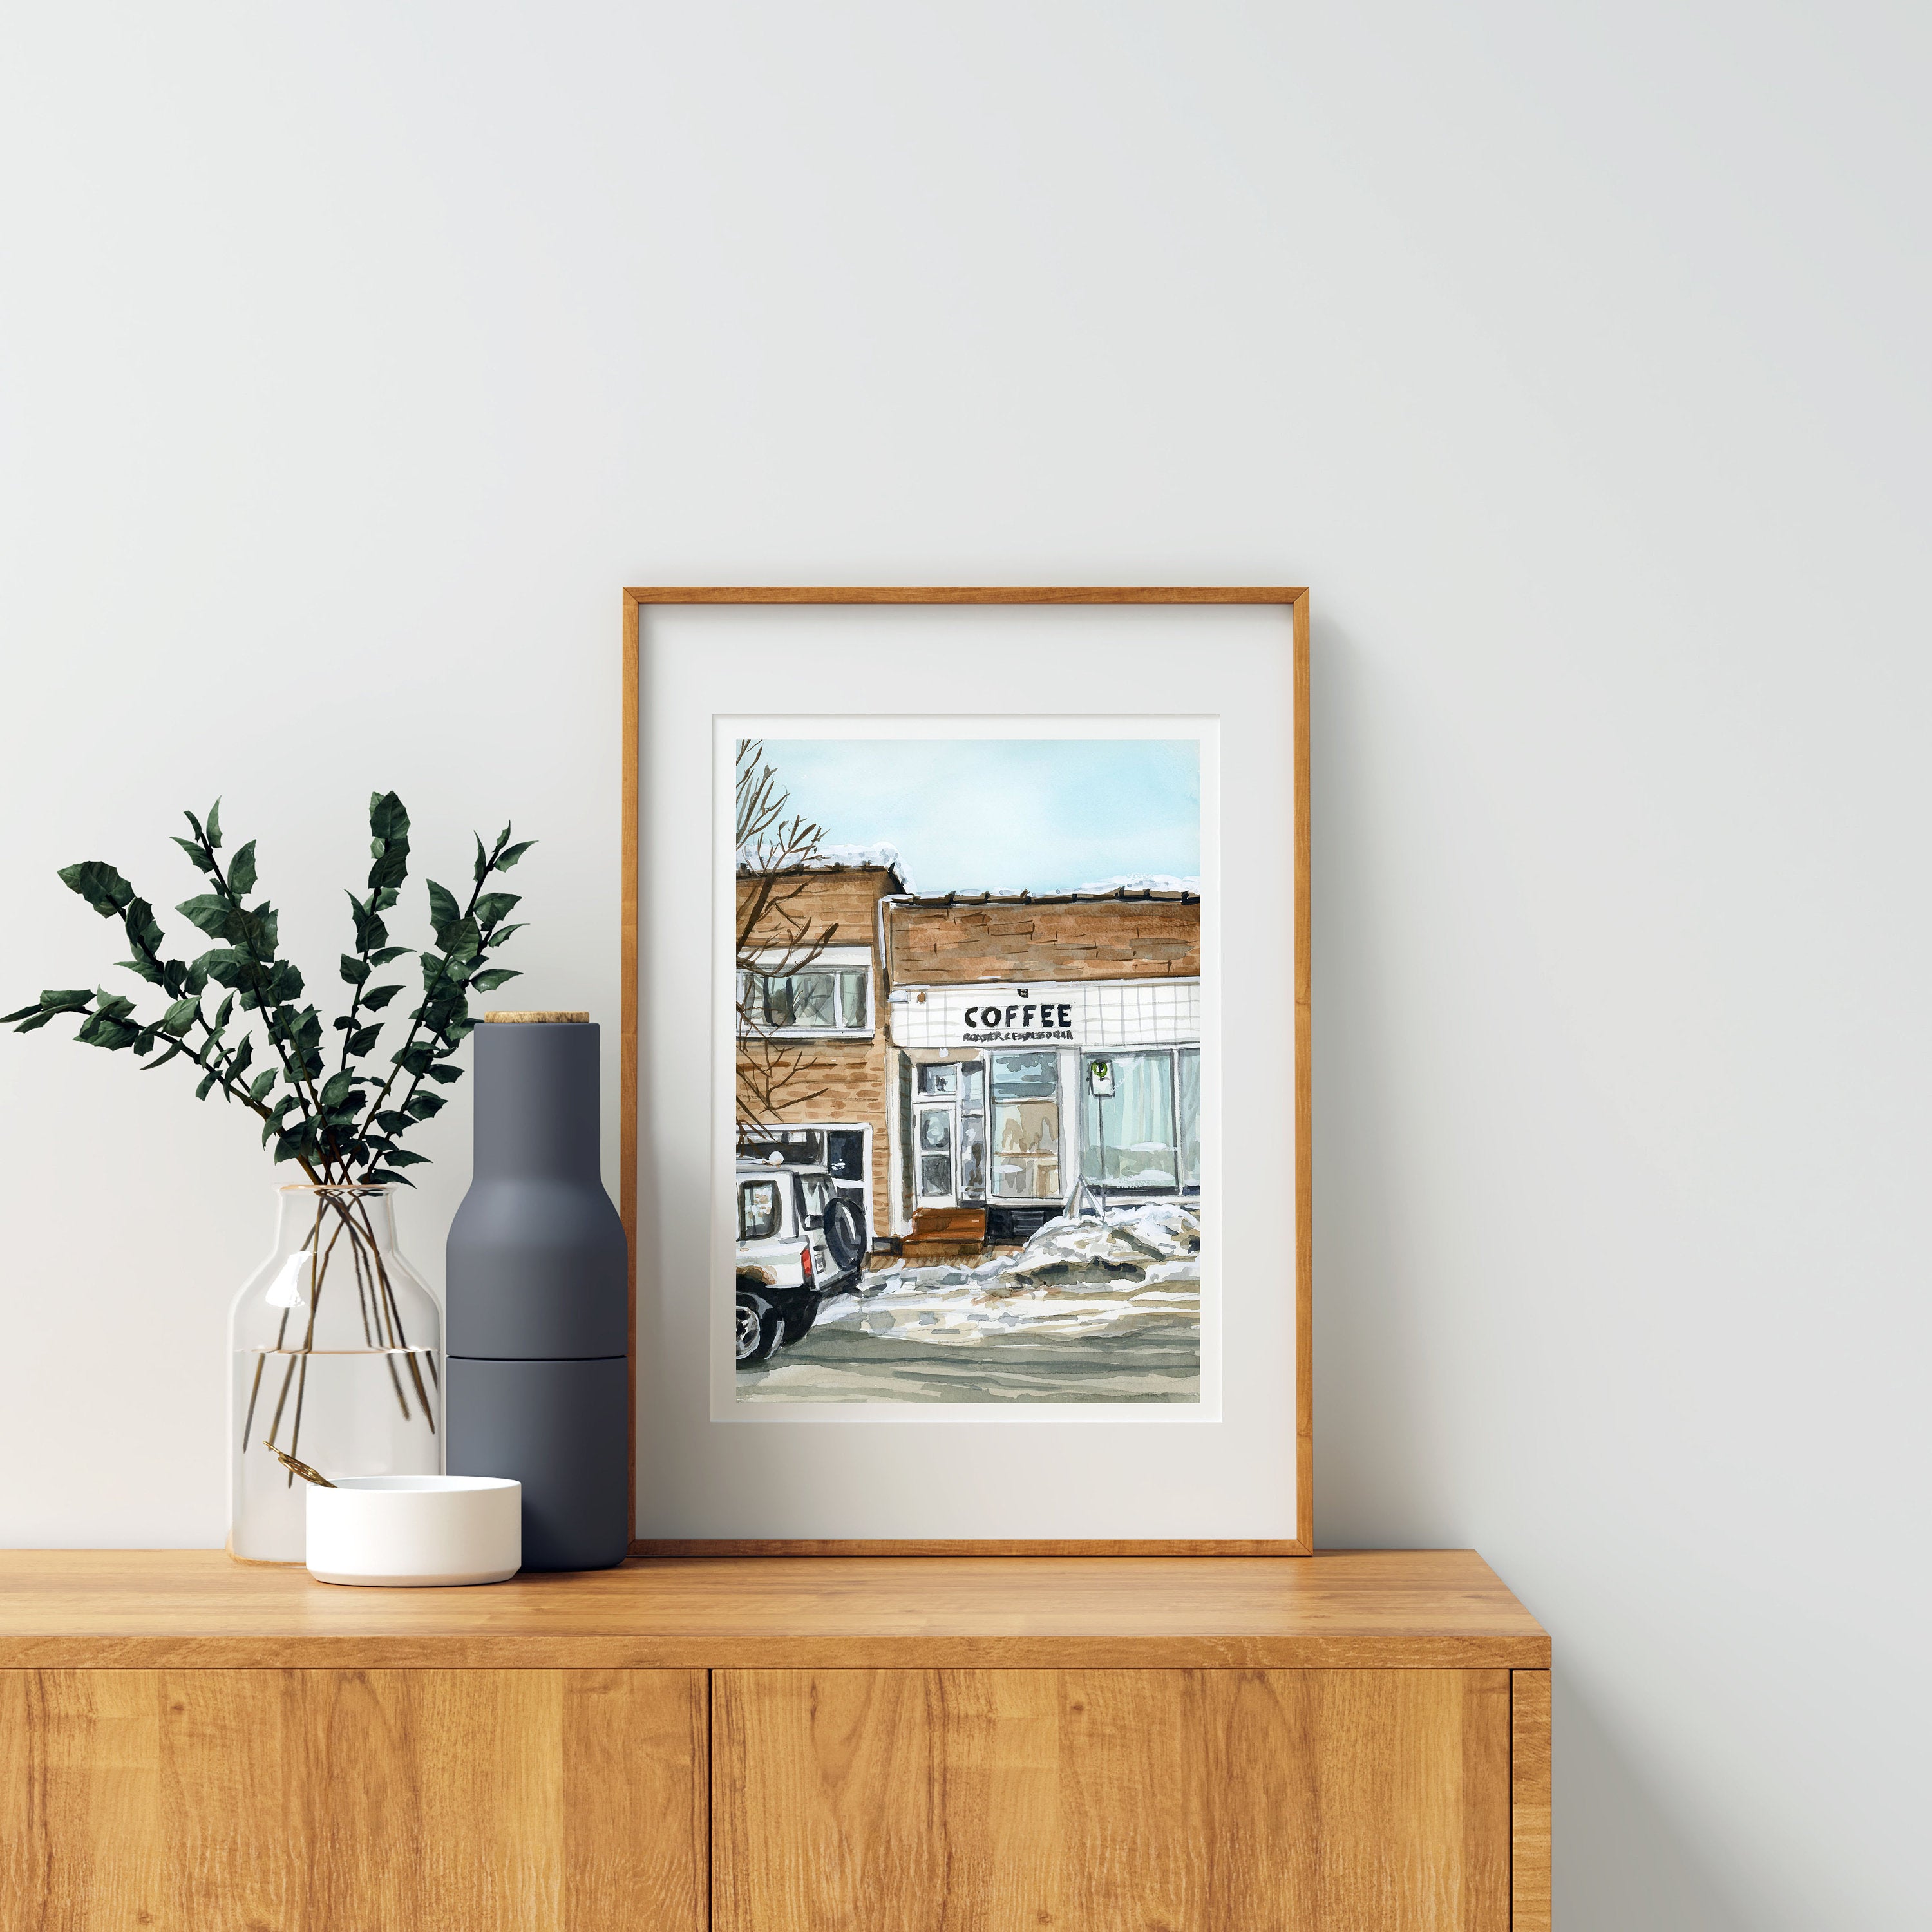 Winter coffee shop print of painting by Medjool Studio. Print of an original gouache painting that captures the charming essence of the mountain town of Kimberly, British Columbia featuring the iconic Kick Turn Coffee Shop.